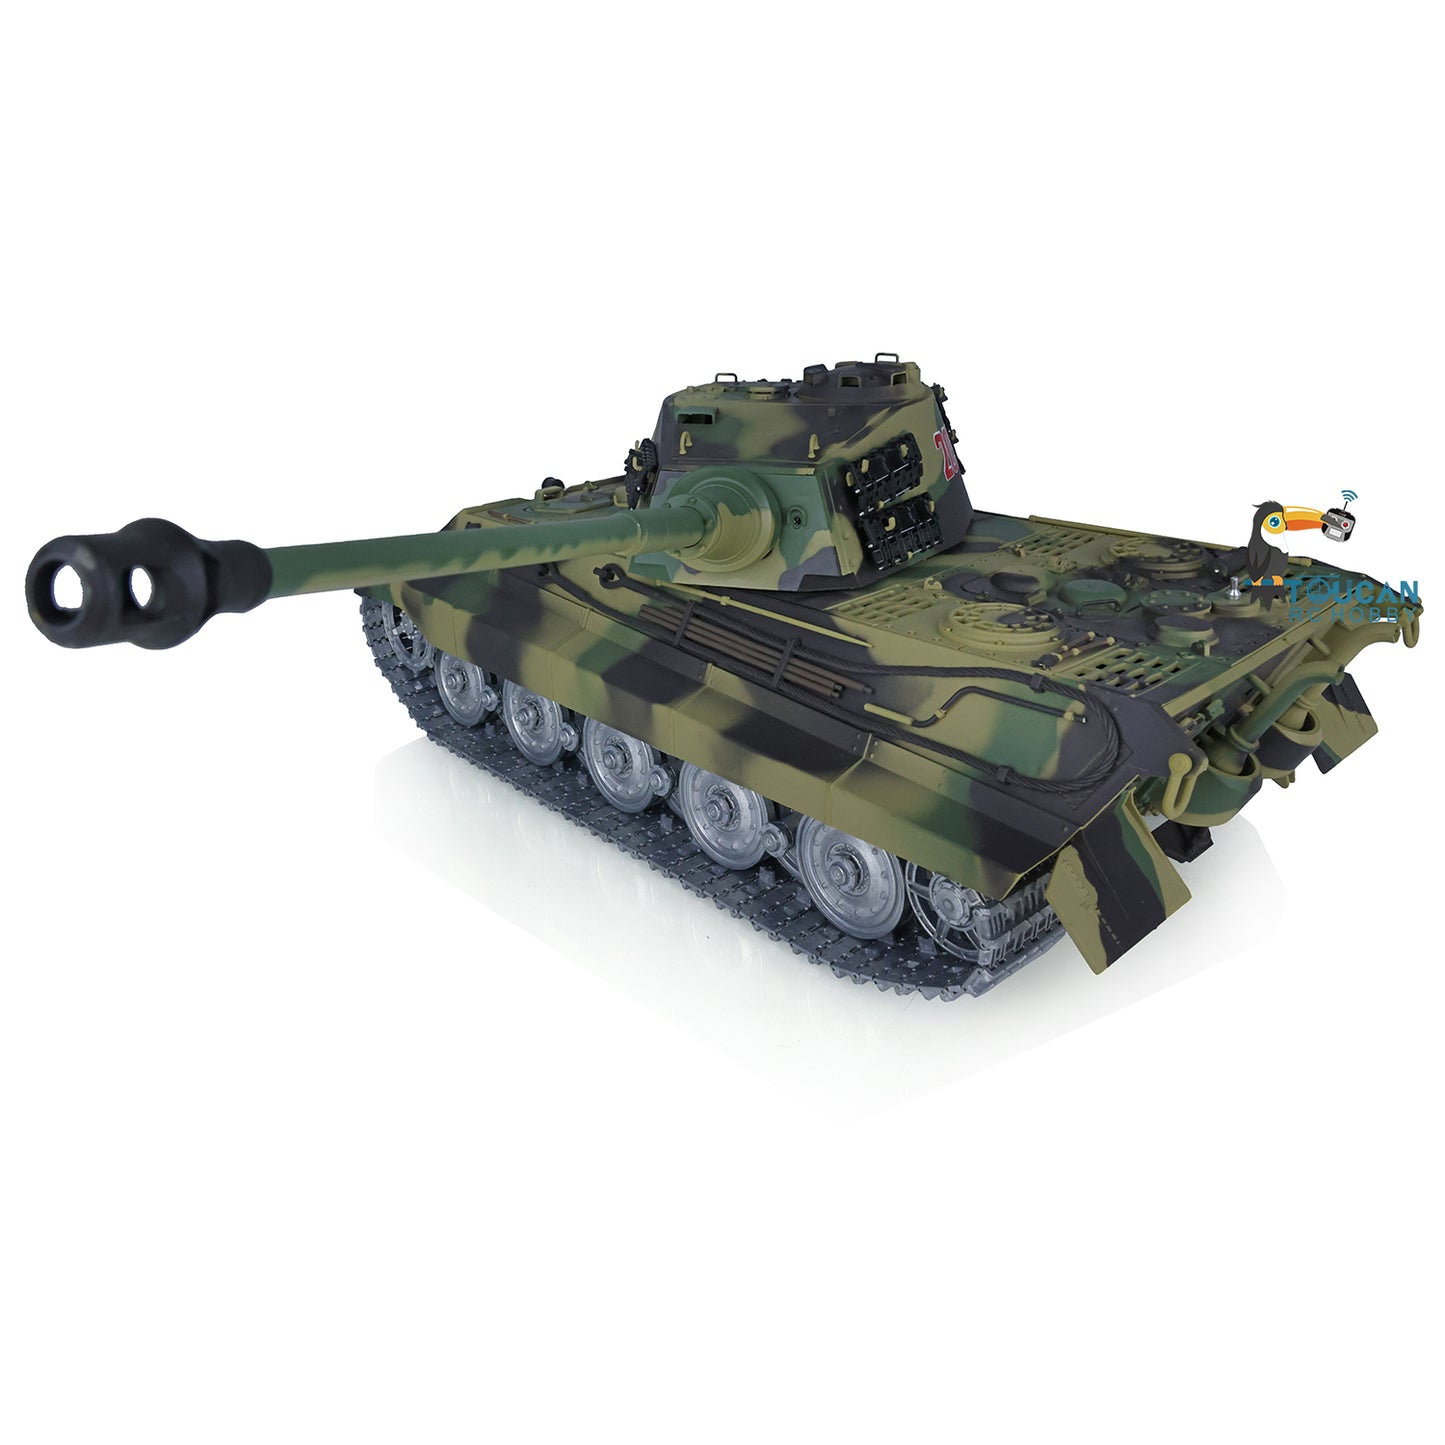 US STOCK Henglong 1/16 Scale Mainboard 7.0 Customized King Tiger RC Battle Tank 3888A Metal Road Wheels Sprockets Barrel Recoil